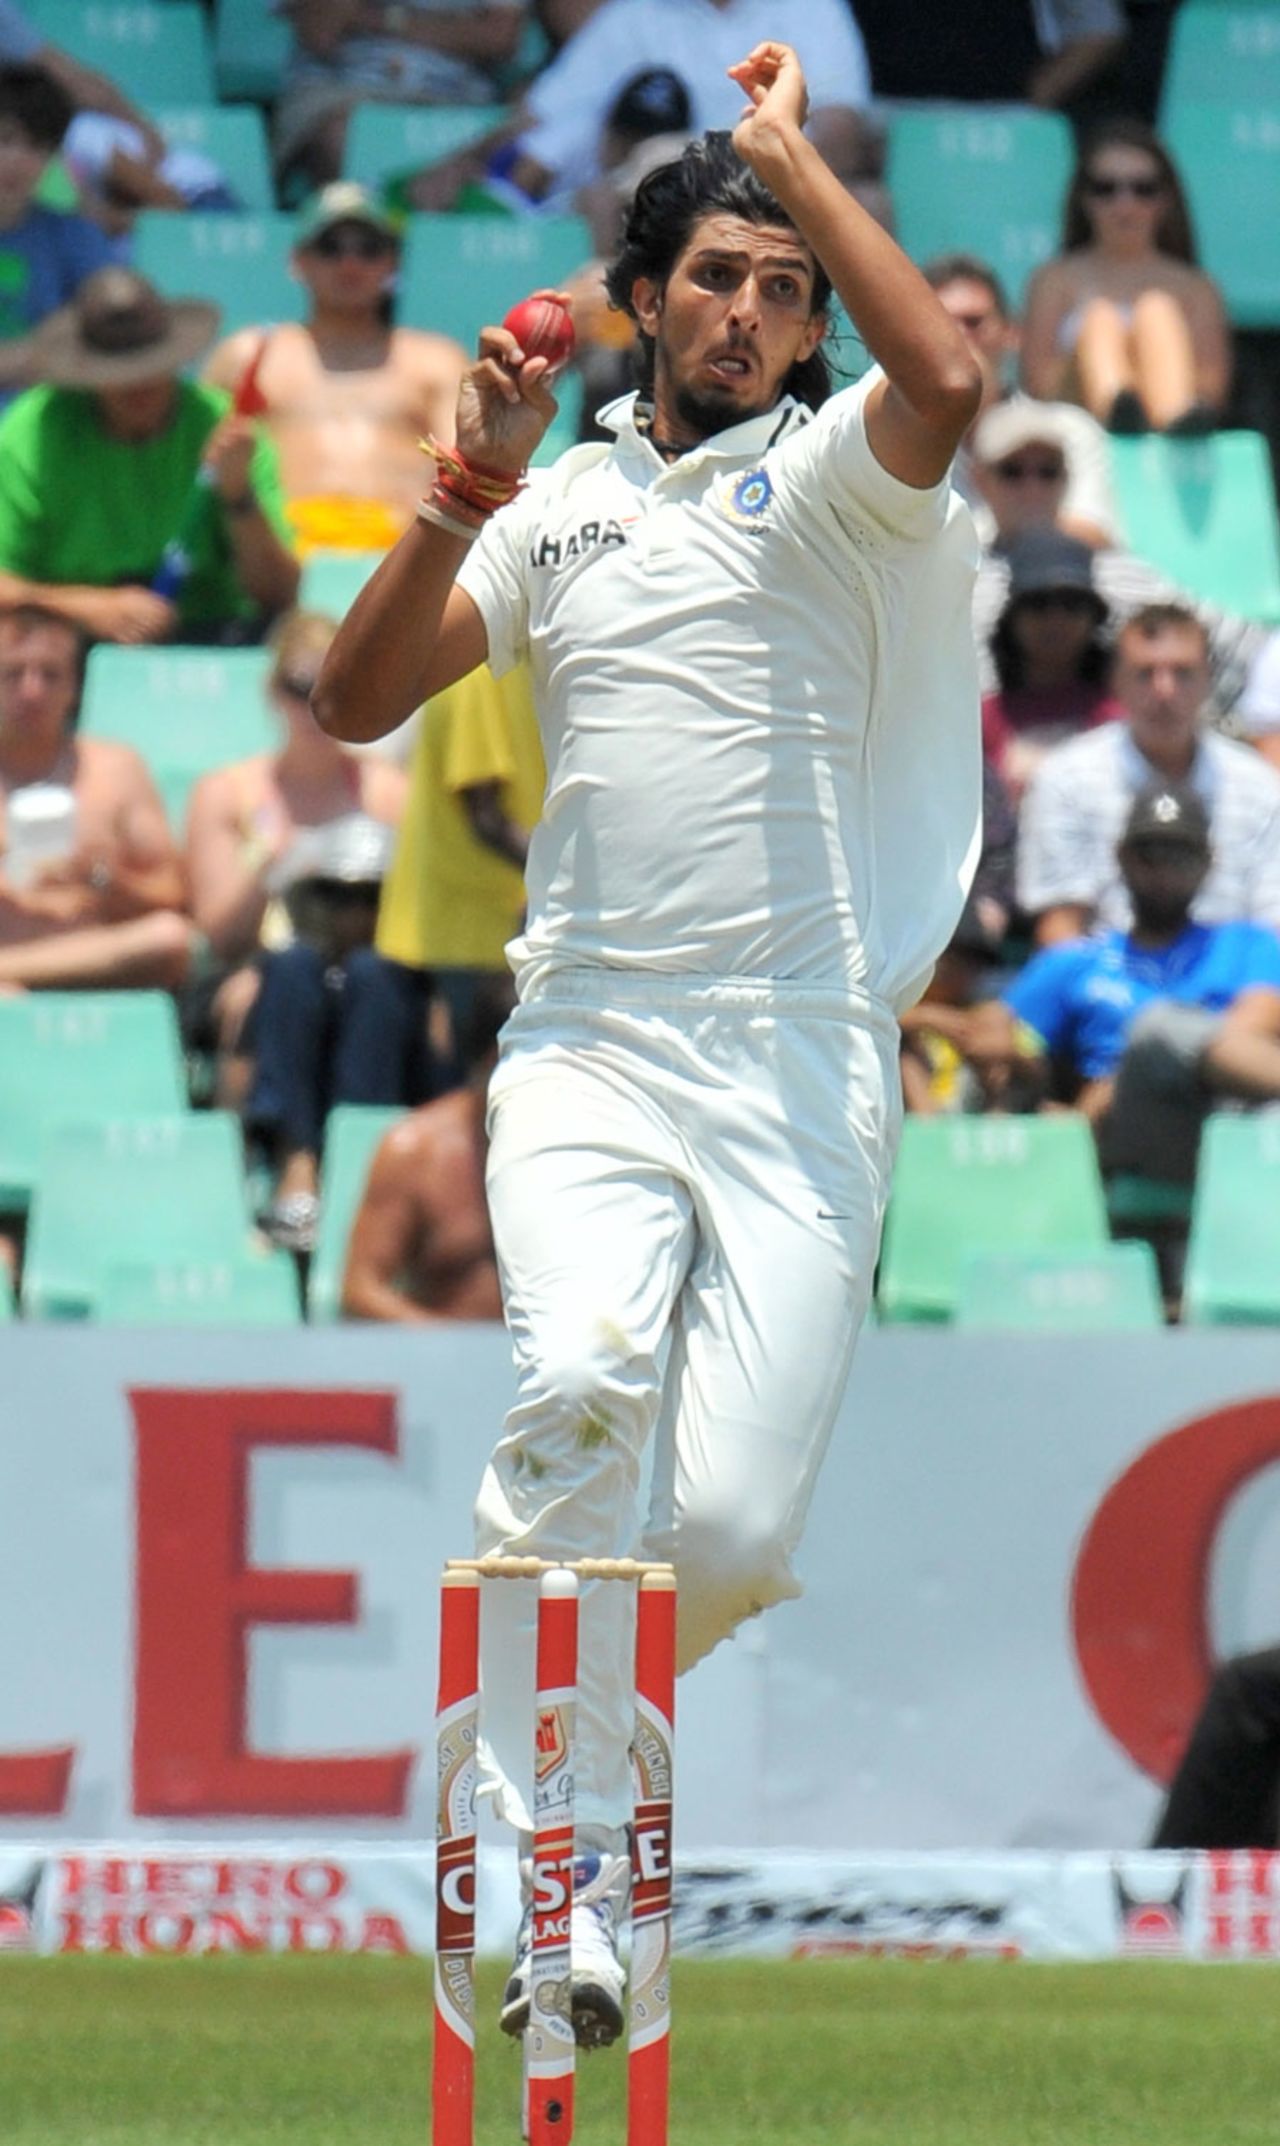 Ishant Sharma runs in on the second day, South Africa v India, 2nd Test, Durban, 2nd day, December 27, 2010 